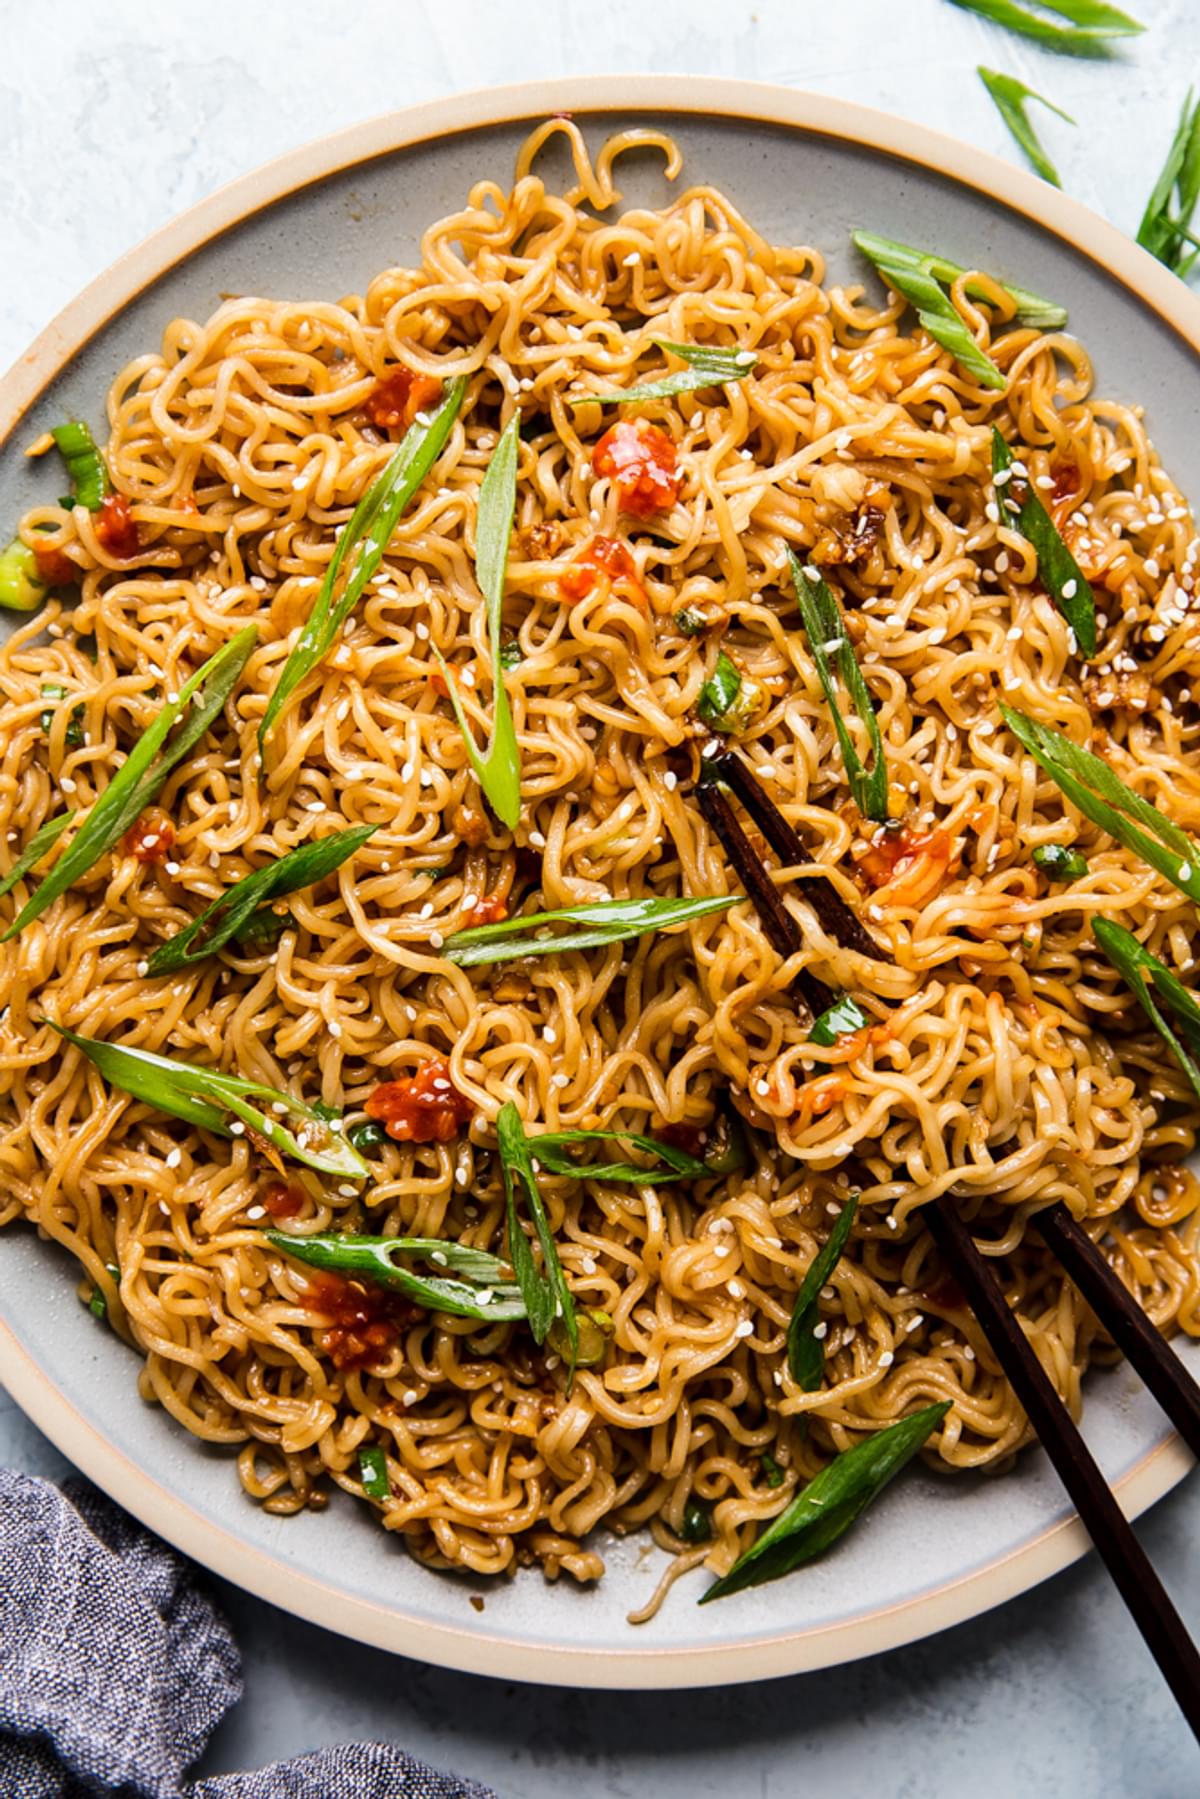 Sesame Garlic Noodles on a plate with garlic chili sauce